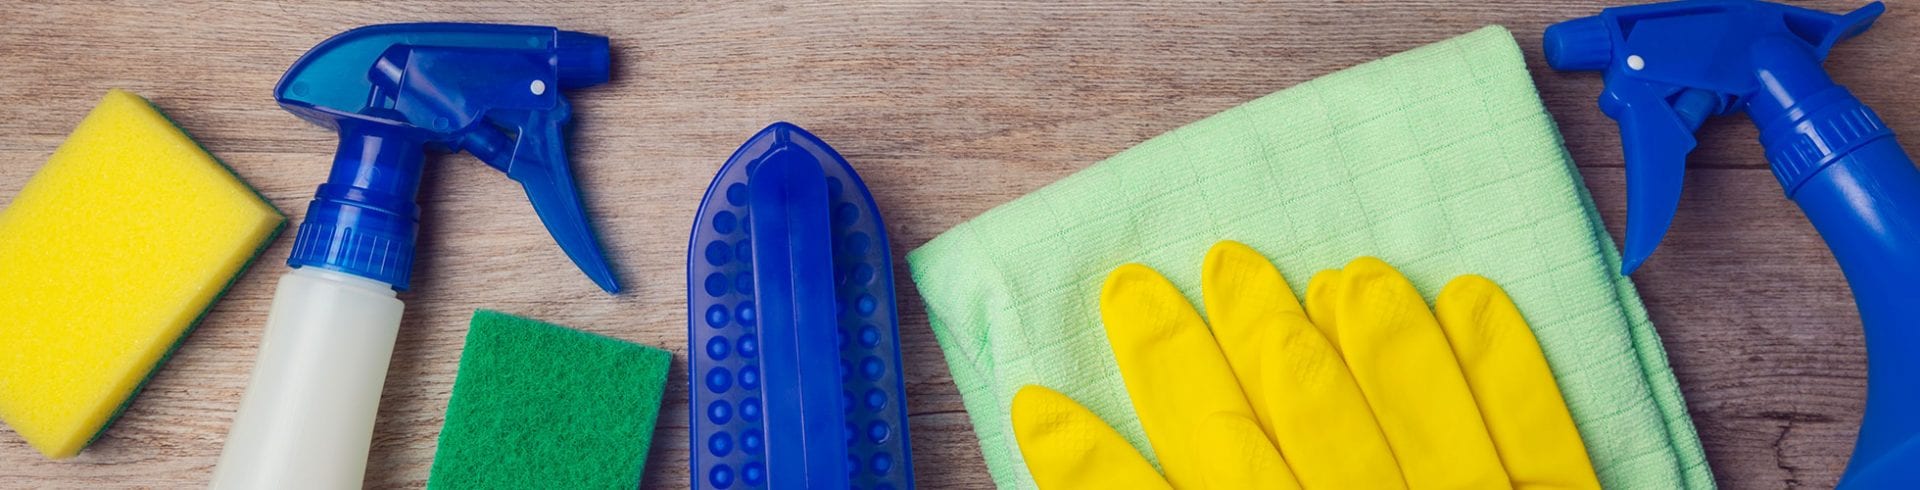 What to Wear When Cleaning Moldy Areas | Blog | Mold Off®